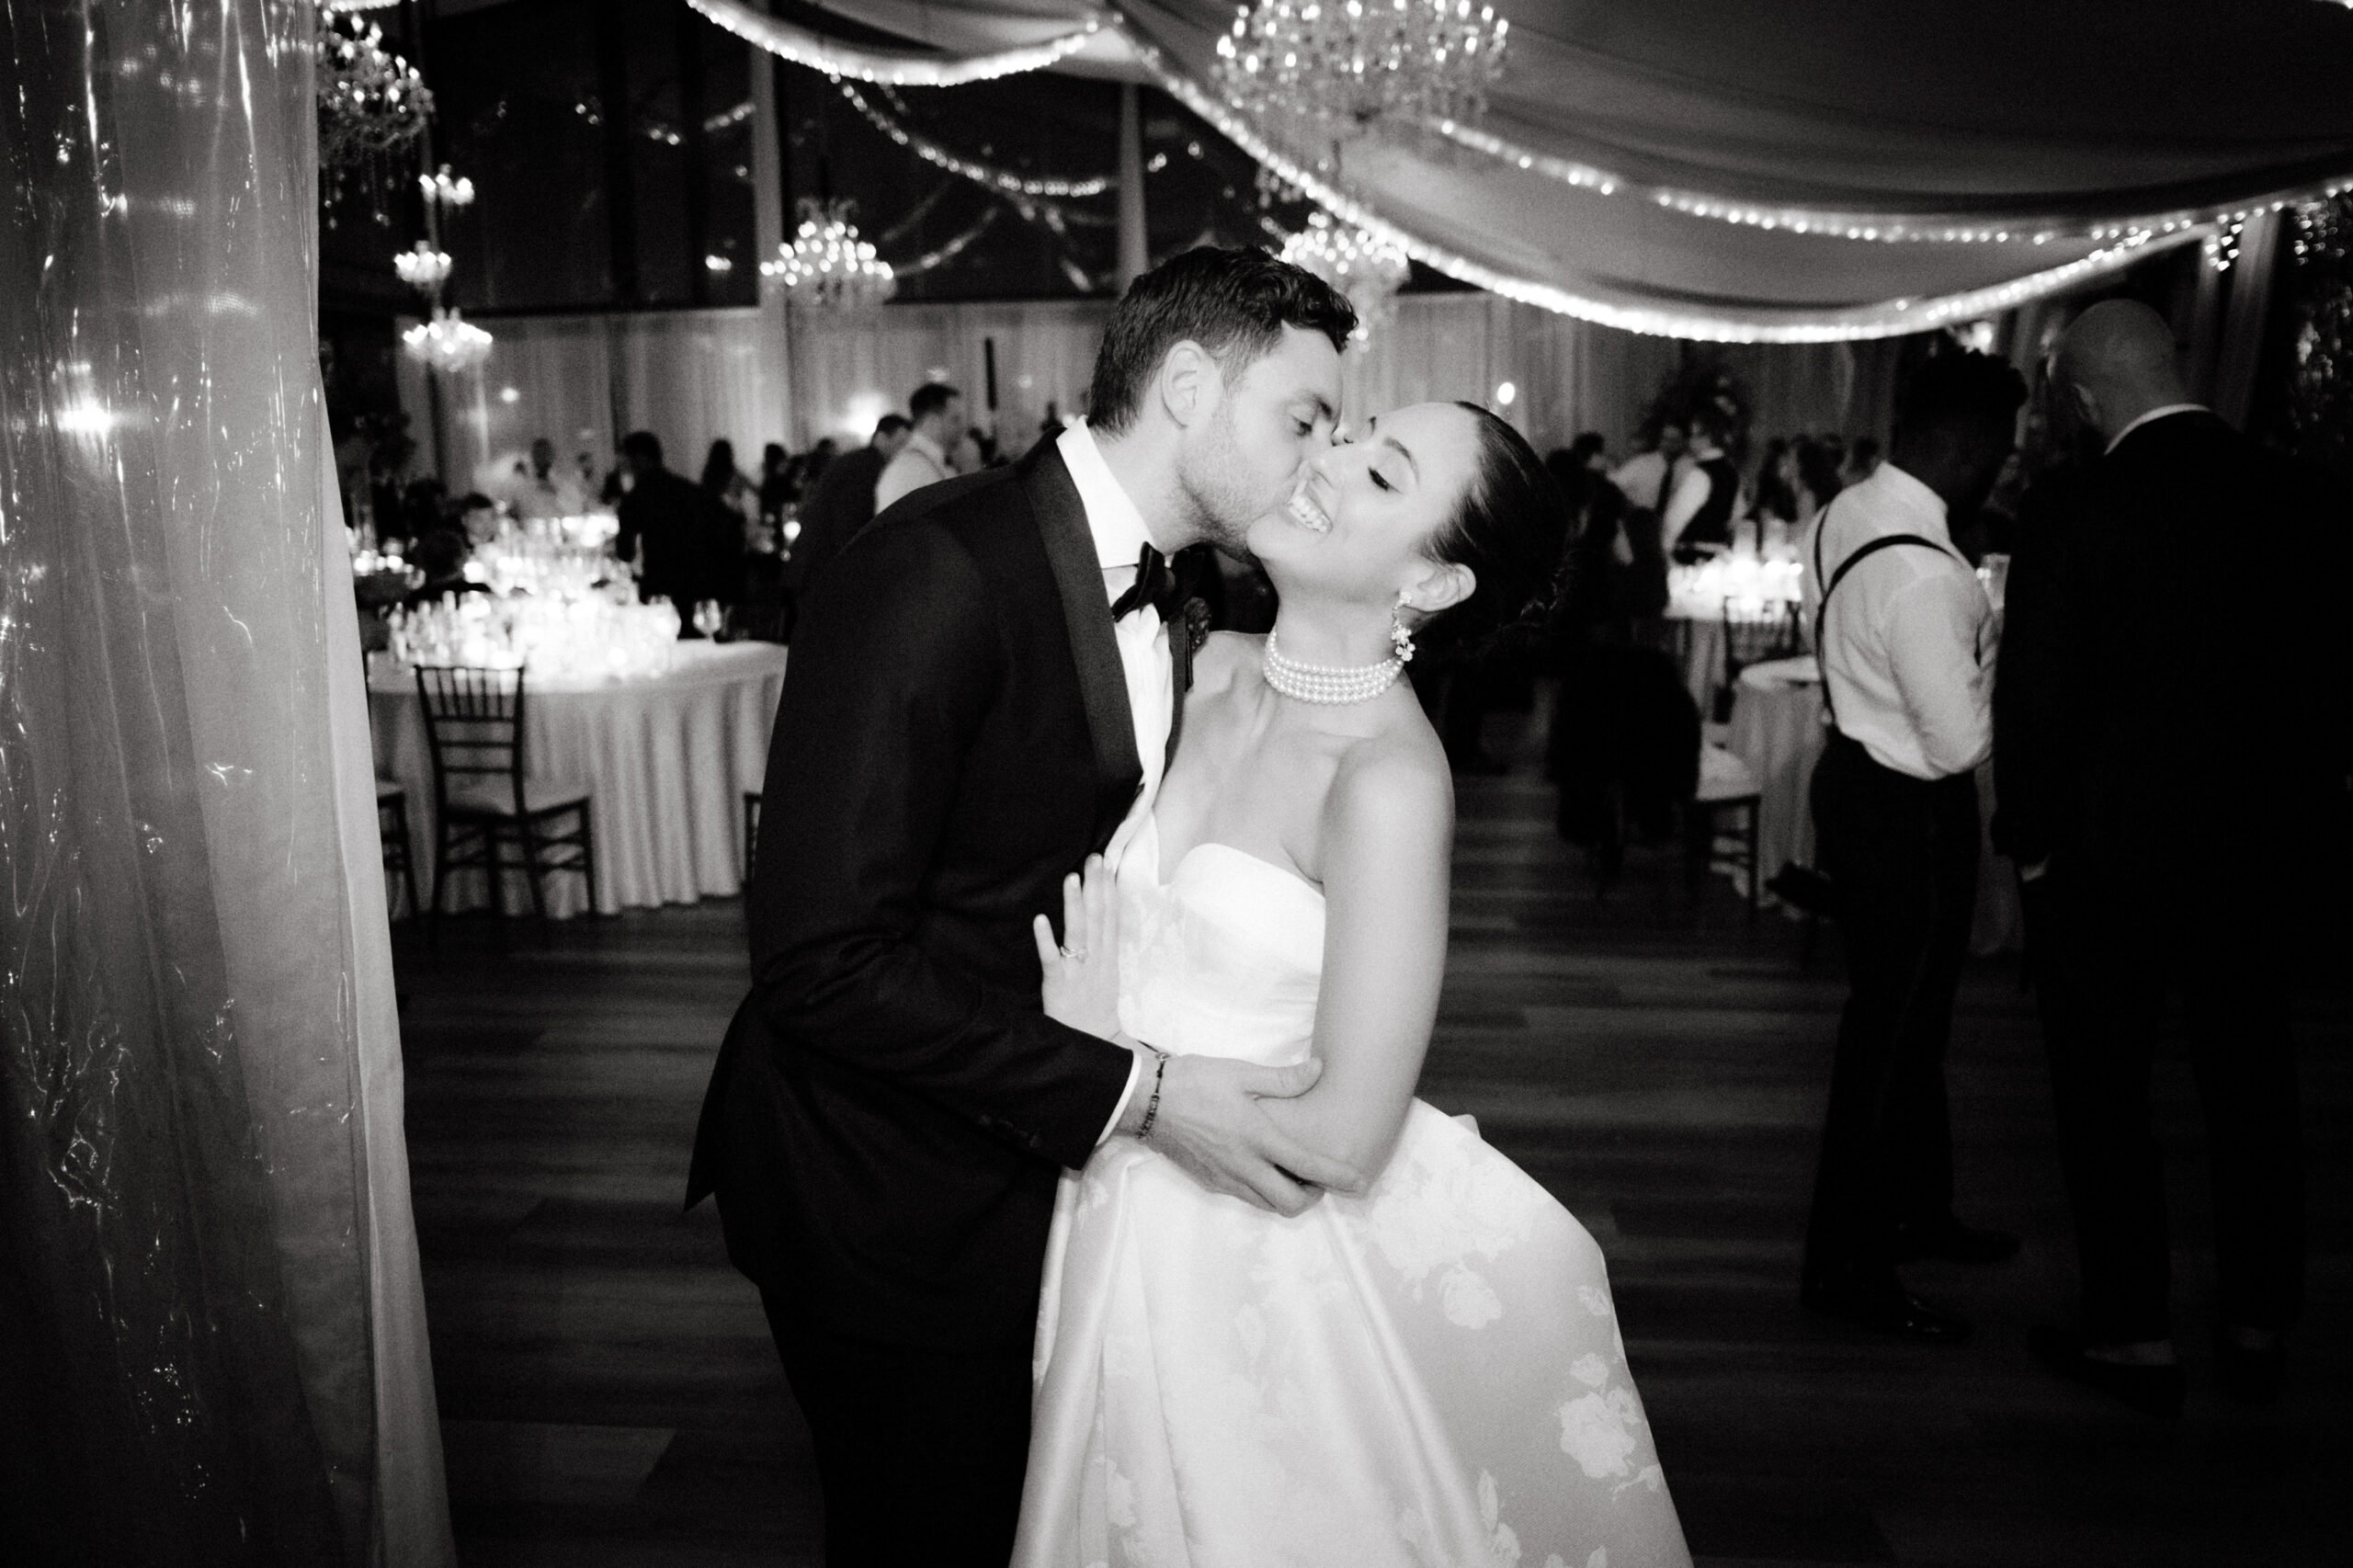 Editorial photo of the groom kissing the bride on the dance floor. Image by Jenny Fu Studio NYC